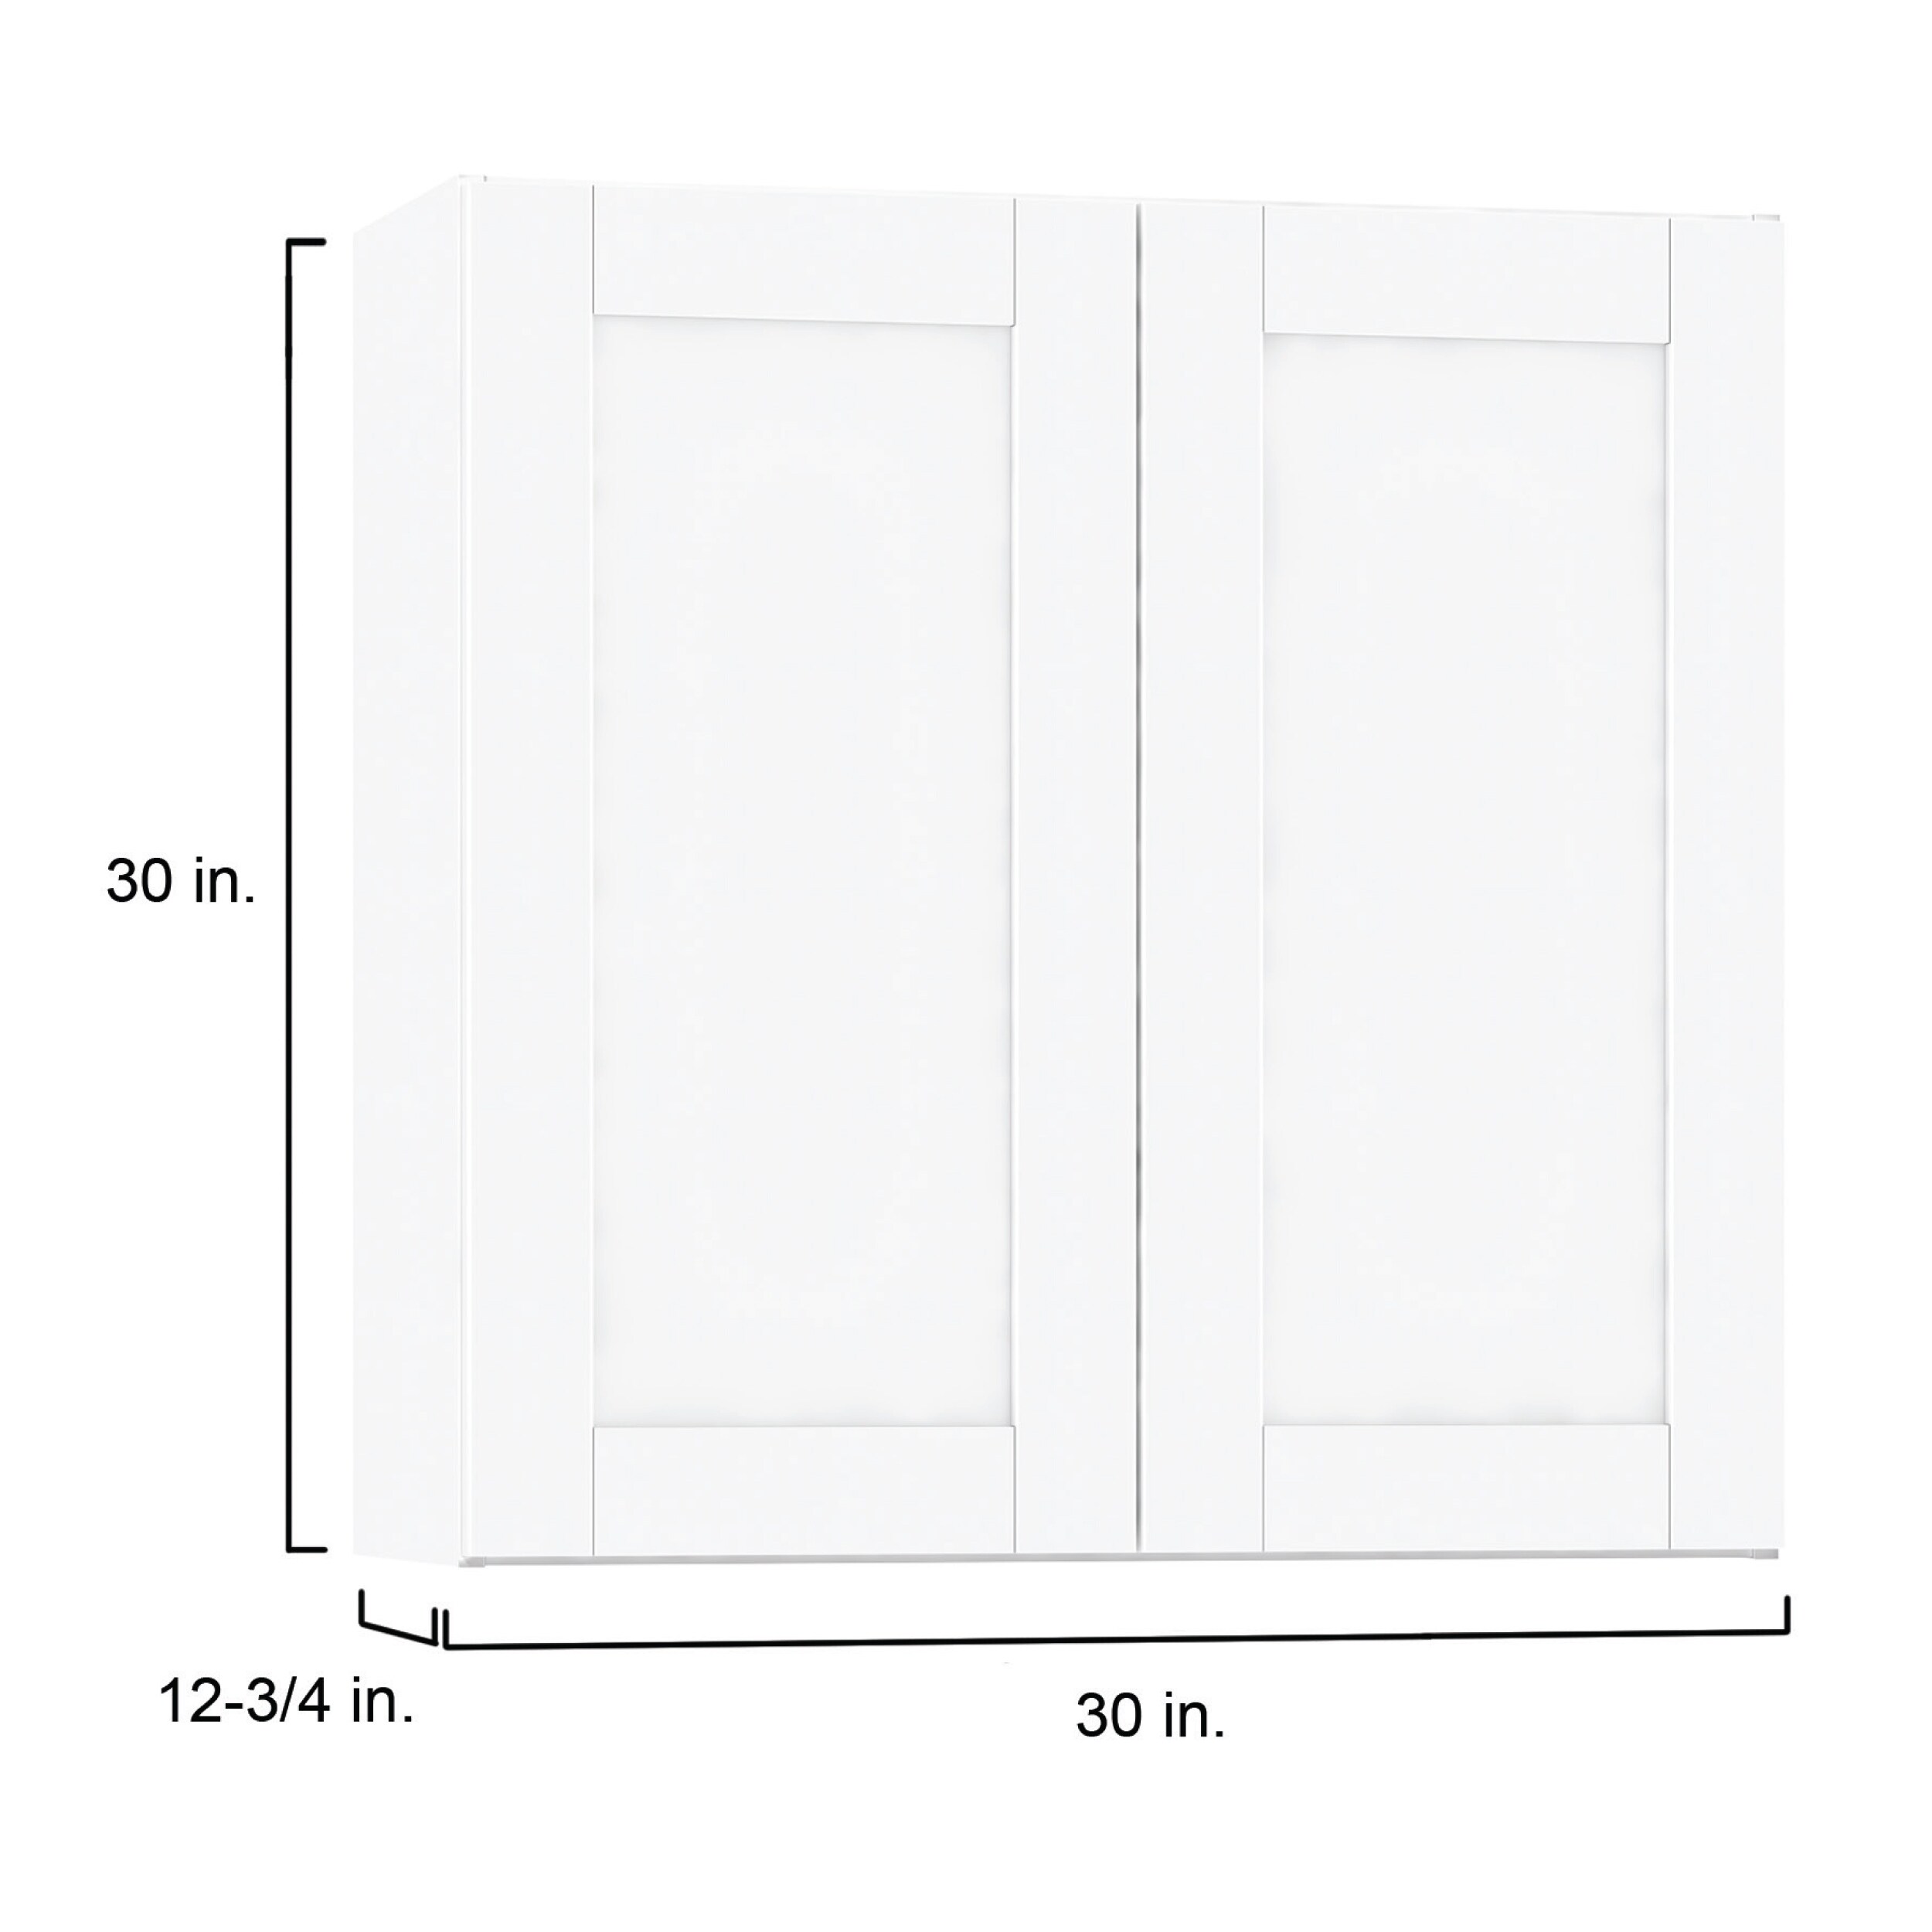 Hugo&Borg Canora 30-in W x 30-in H x 12.75-in D Canora White Door Wall ...